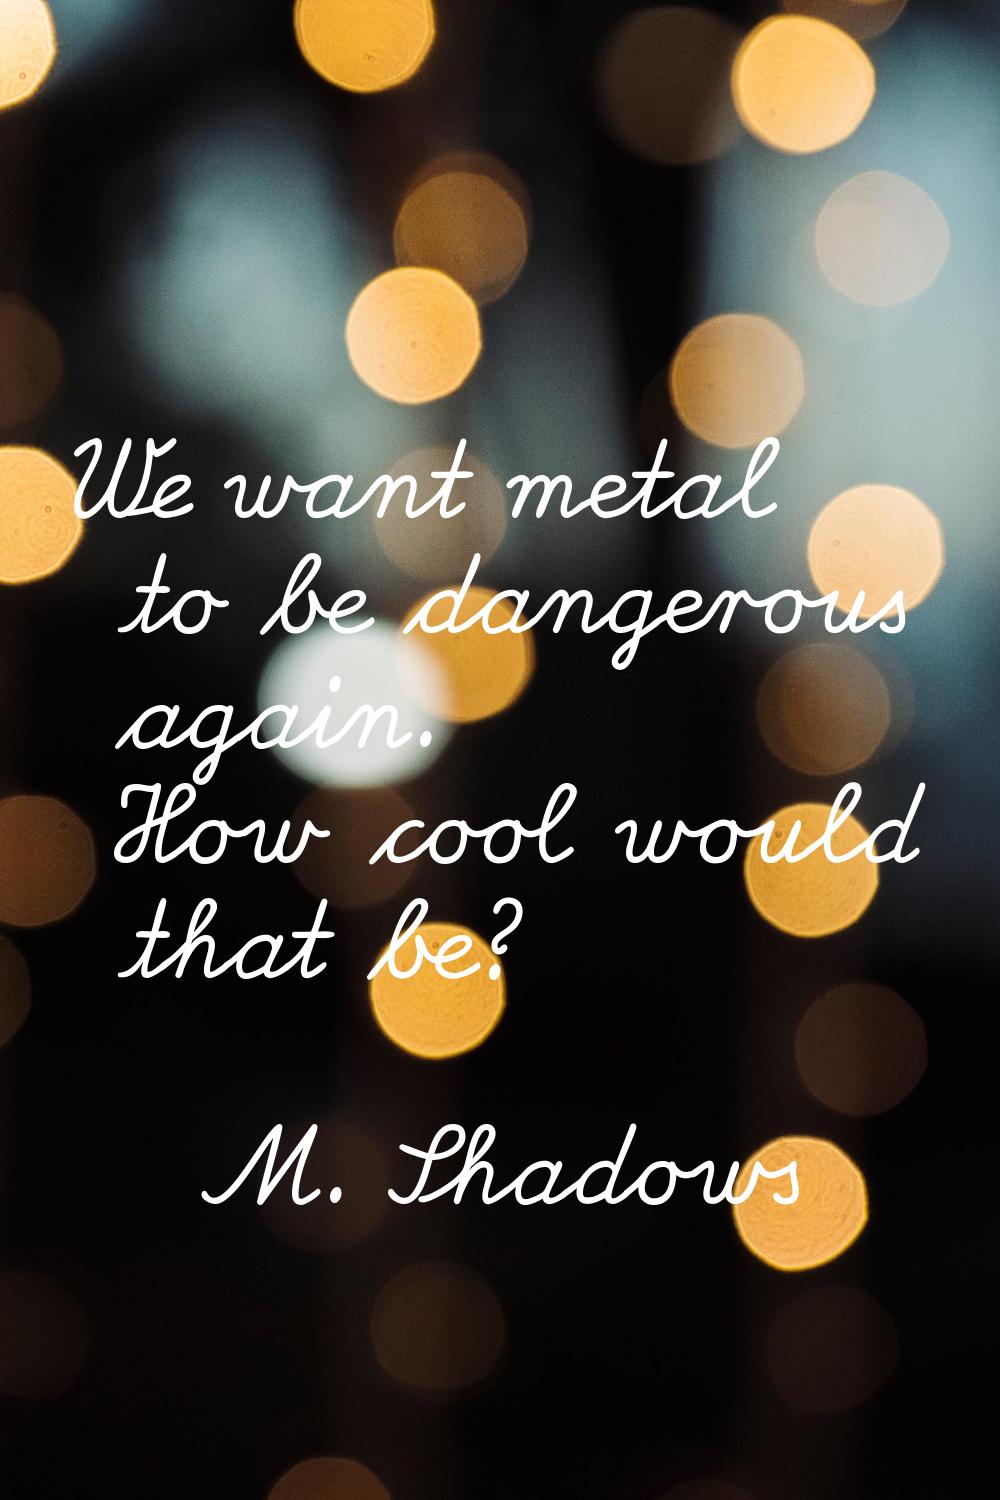 We want metal to be dangerous again. How cool would that be?